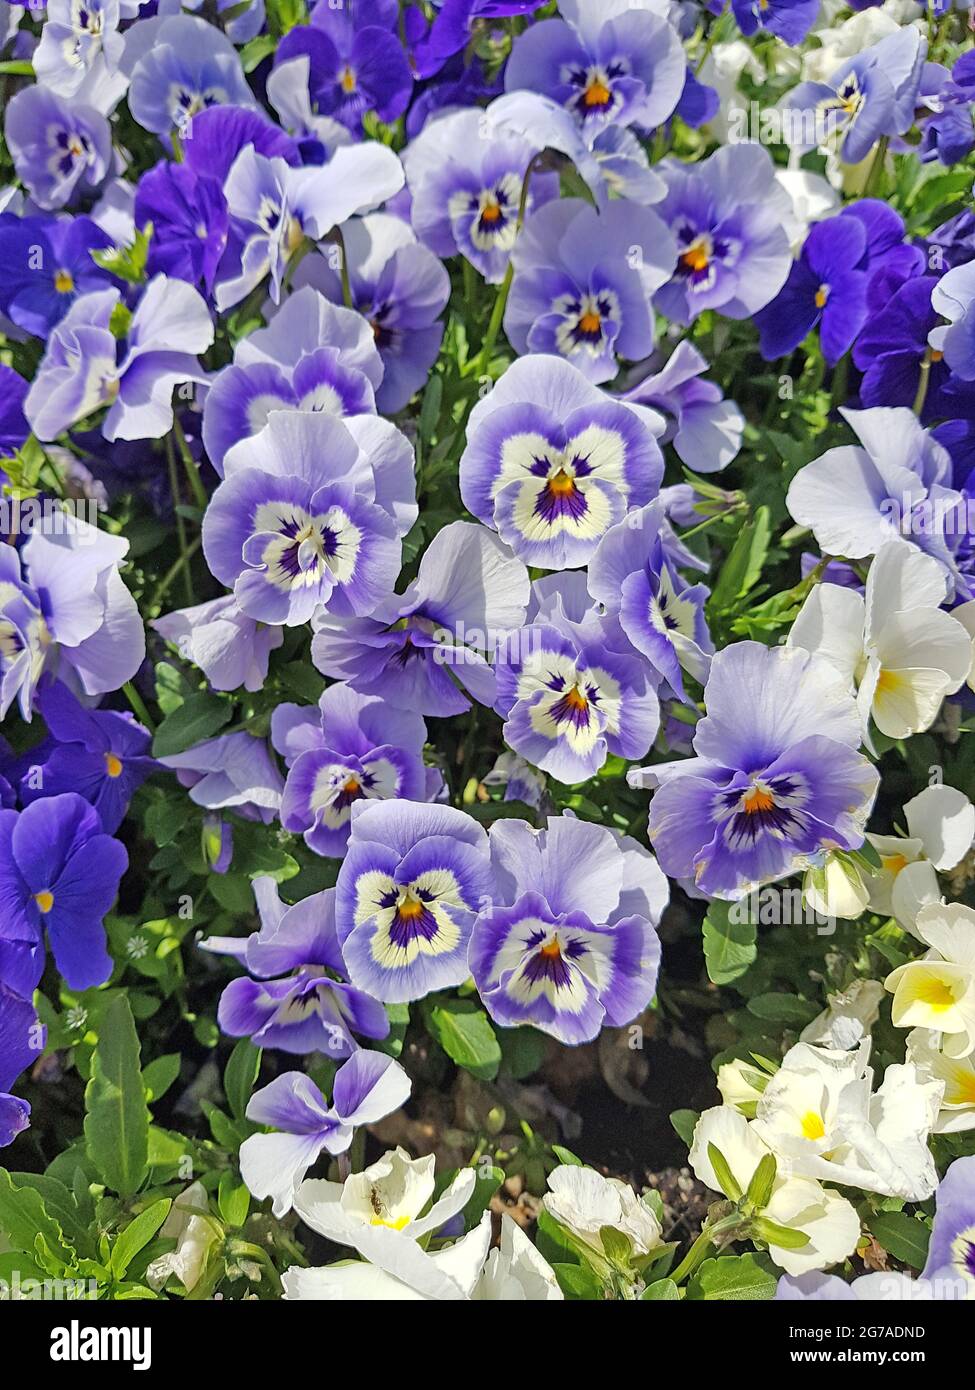 Pansies in the flowerbed Stock Photo